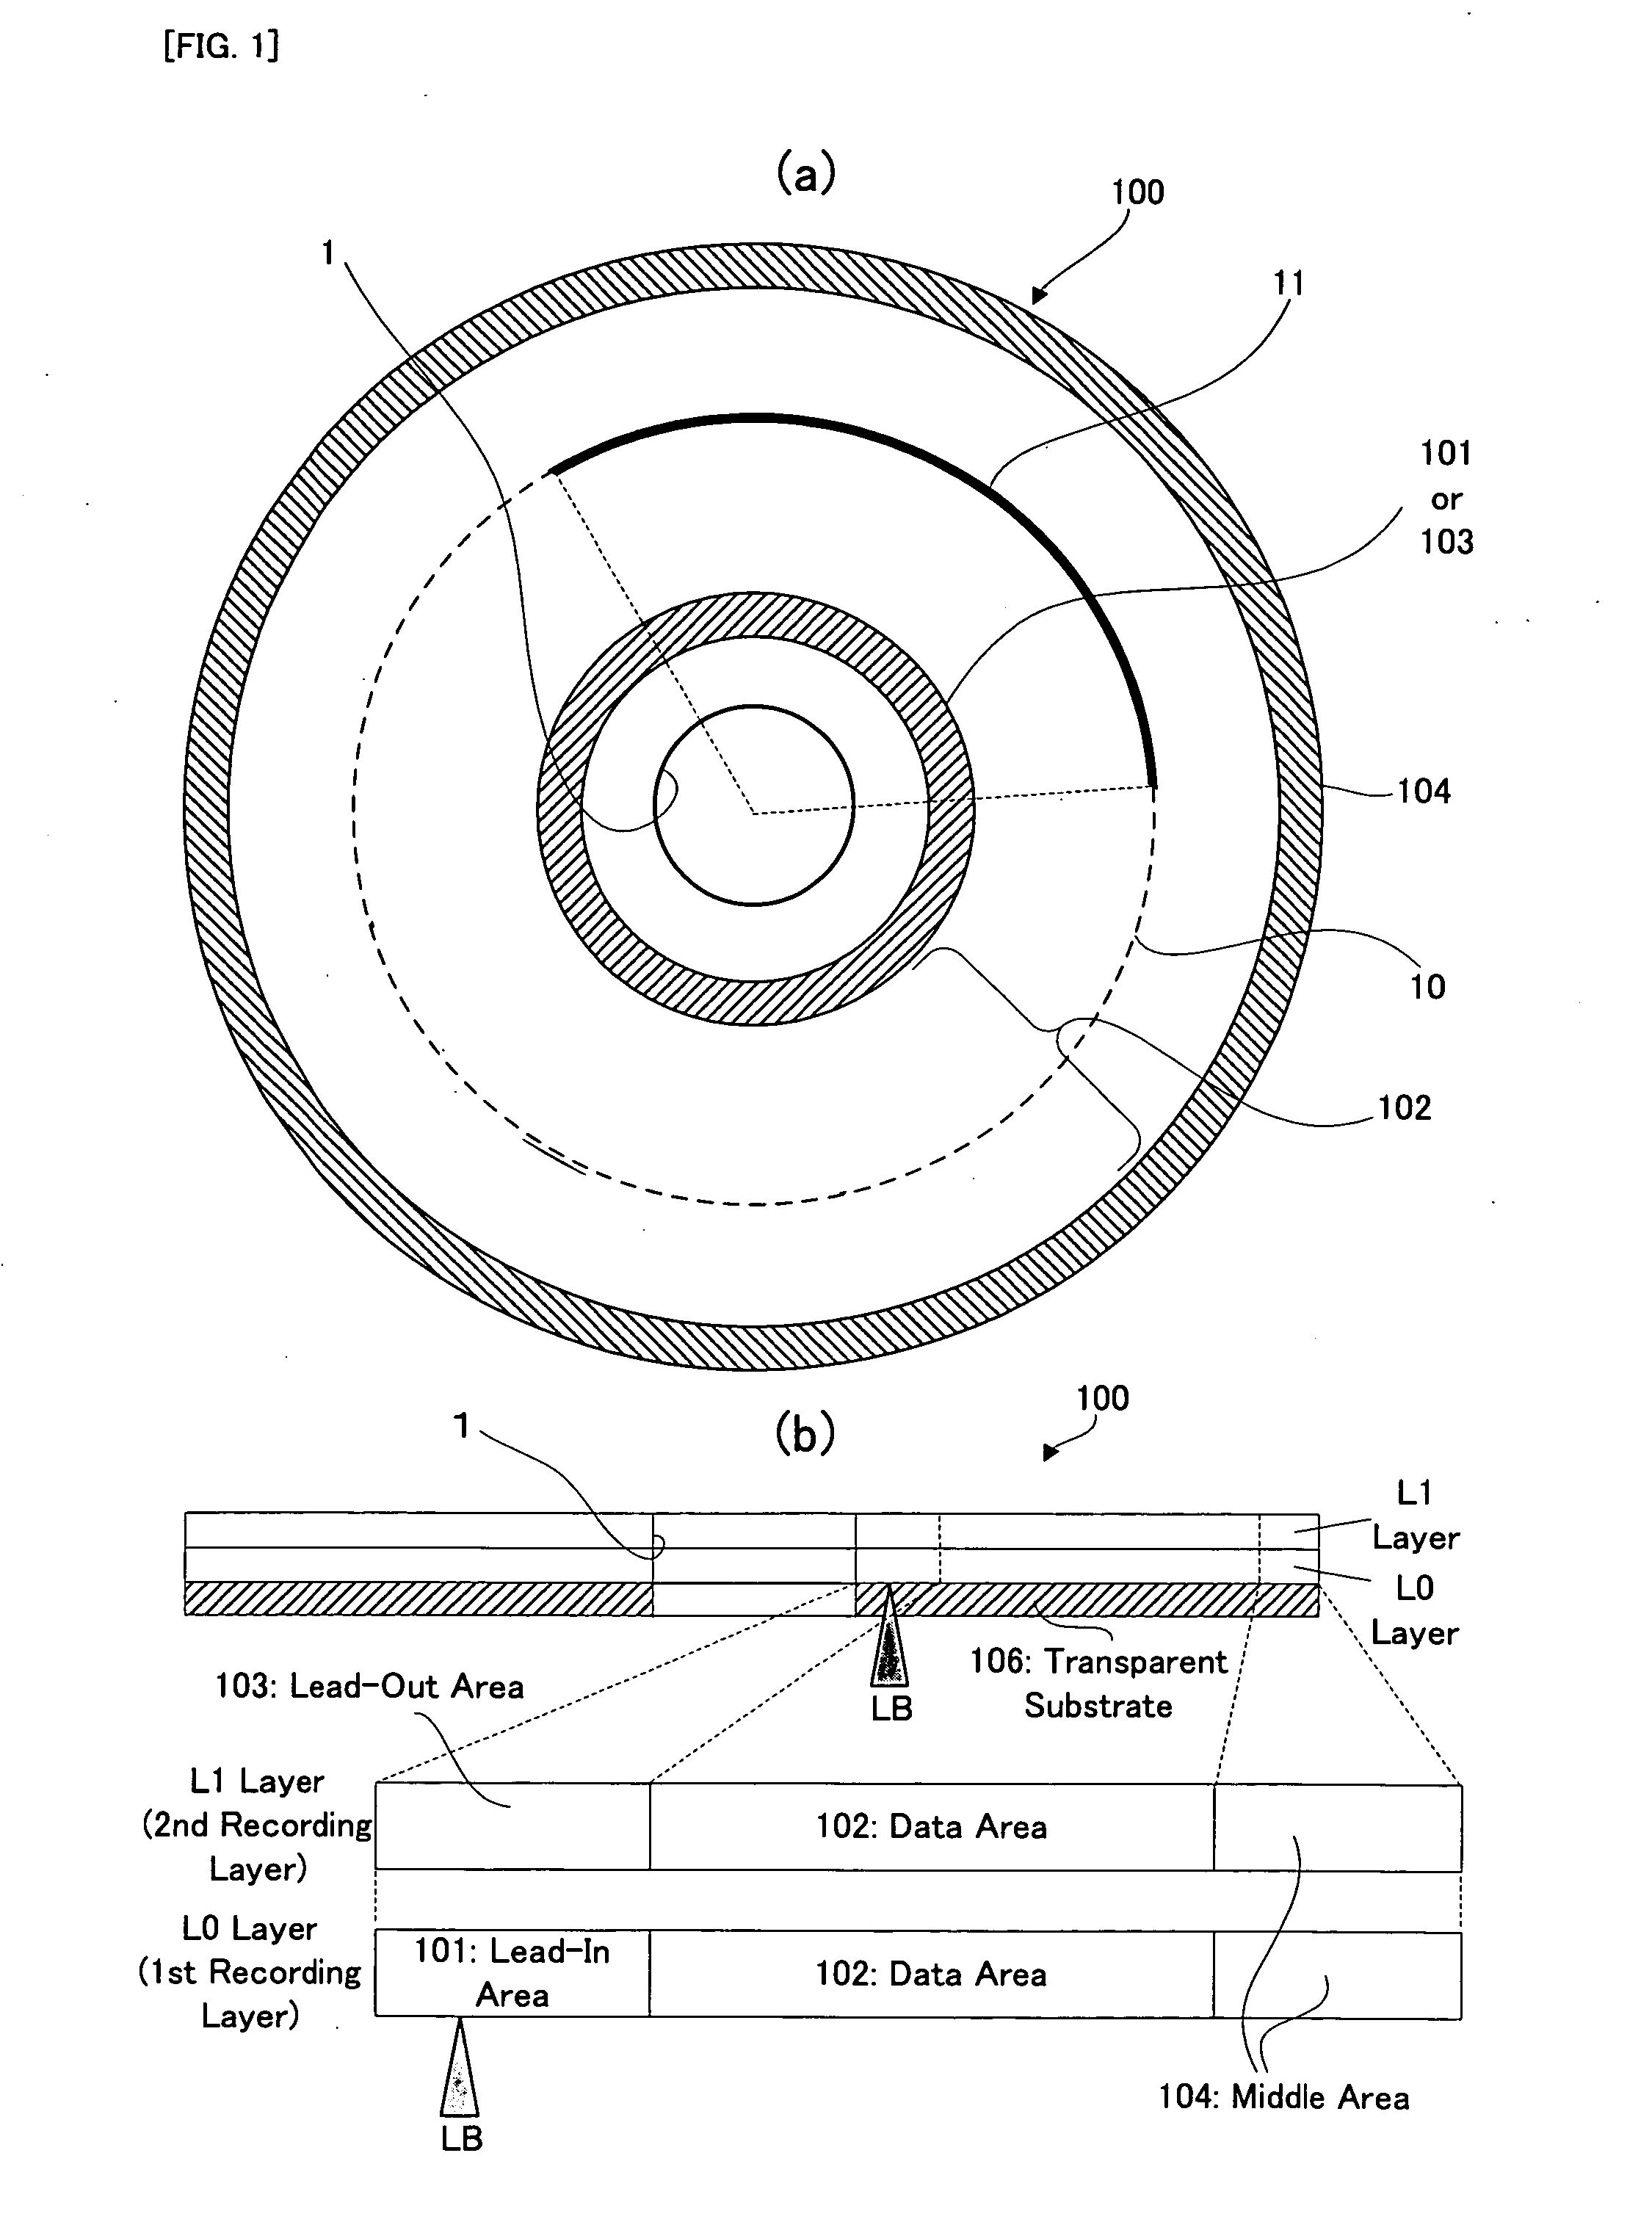 Information recording apparatus and method, and computer program for recording control